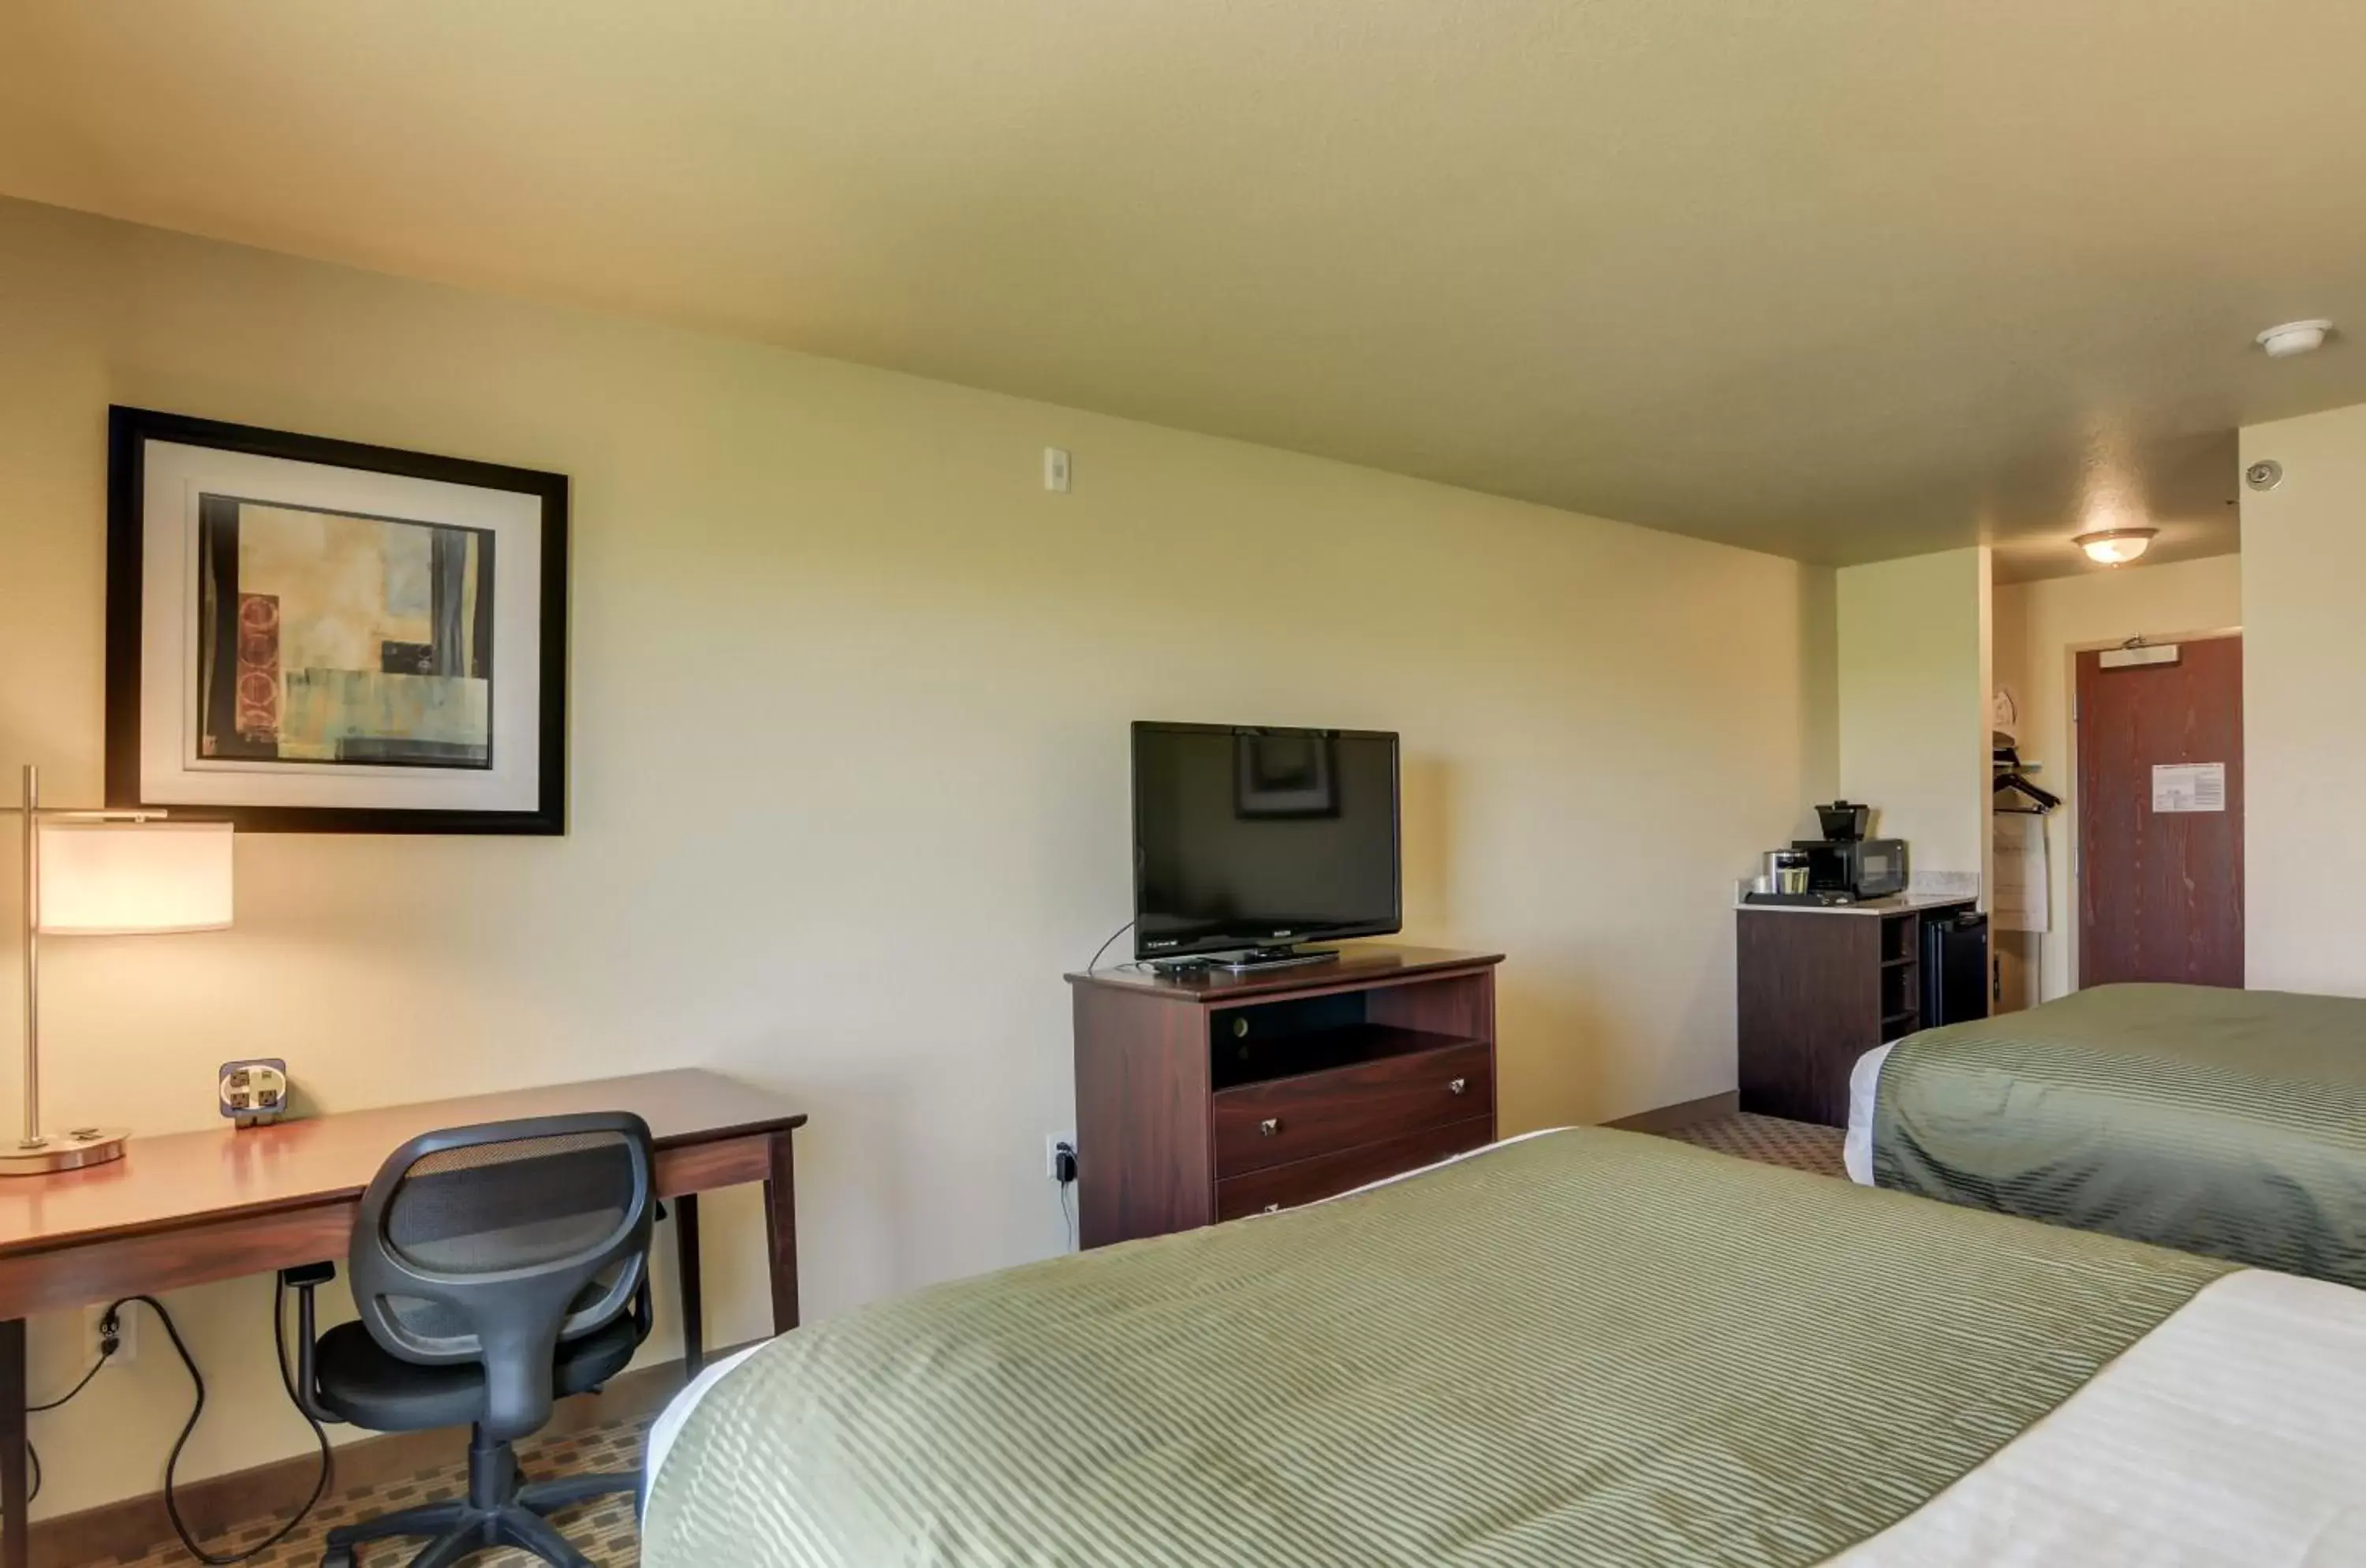 TV and multimedia, Room Photo in Cobblestone Inn & Suites - Ord